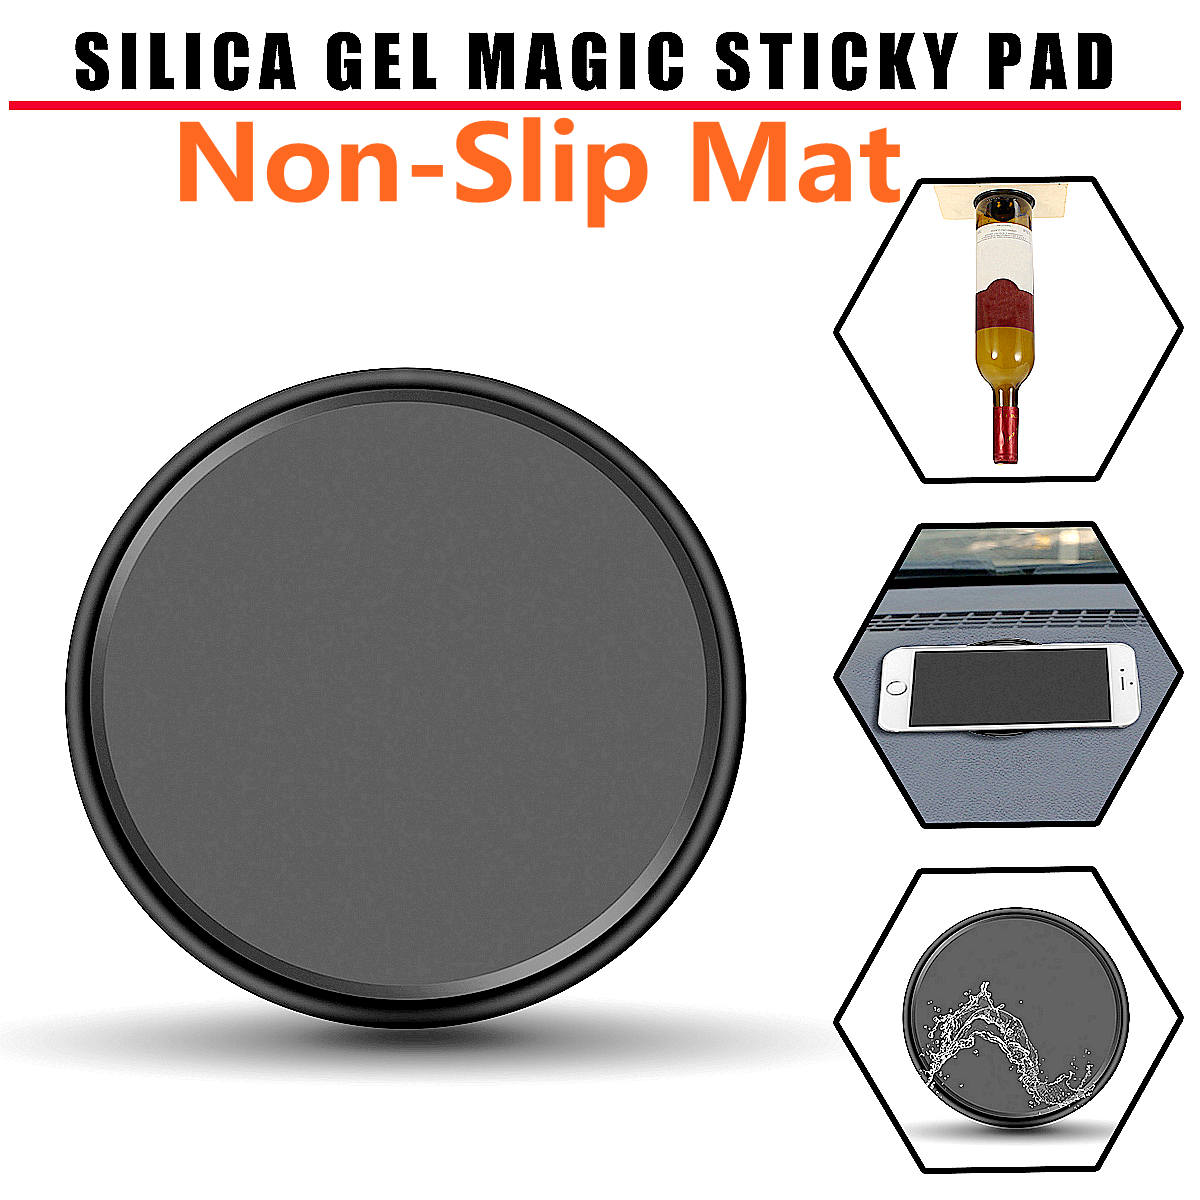 Round-Silica-Gel-Magic-Sticky-Pad-Cellphone-Anti-Slip-Non-Slip-Mat-Protective-Case-for-Mobile-Phone-1307800